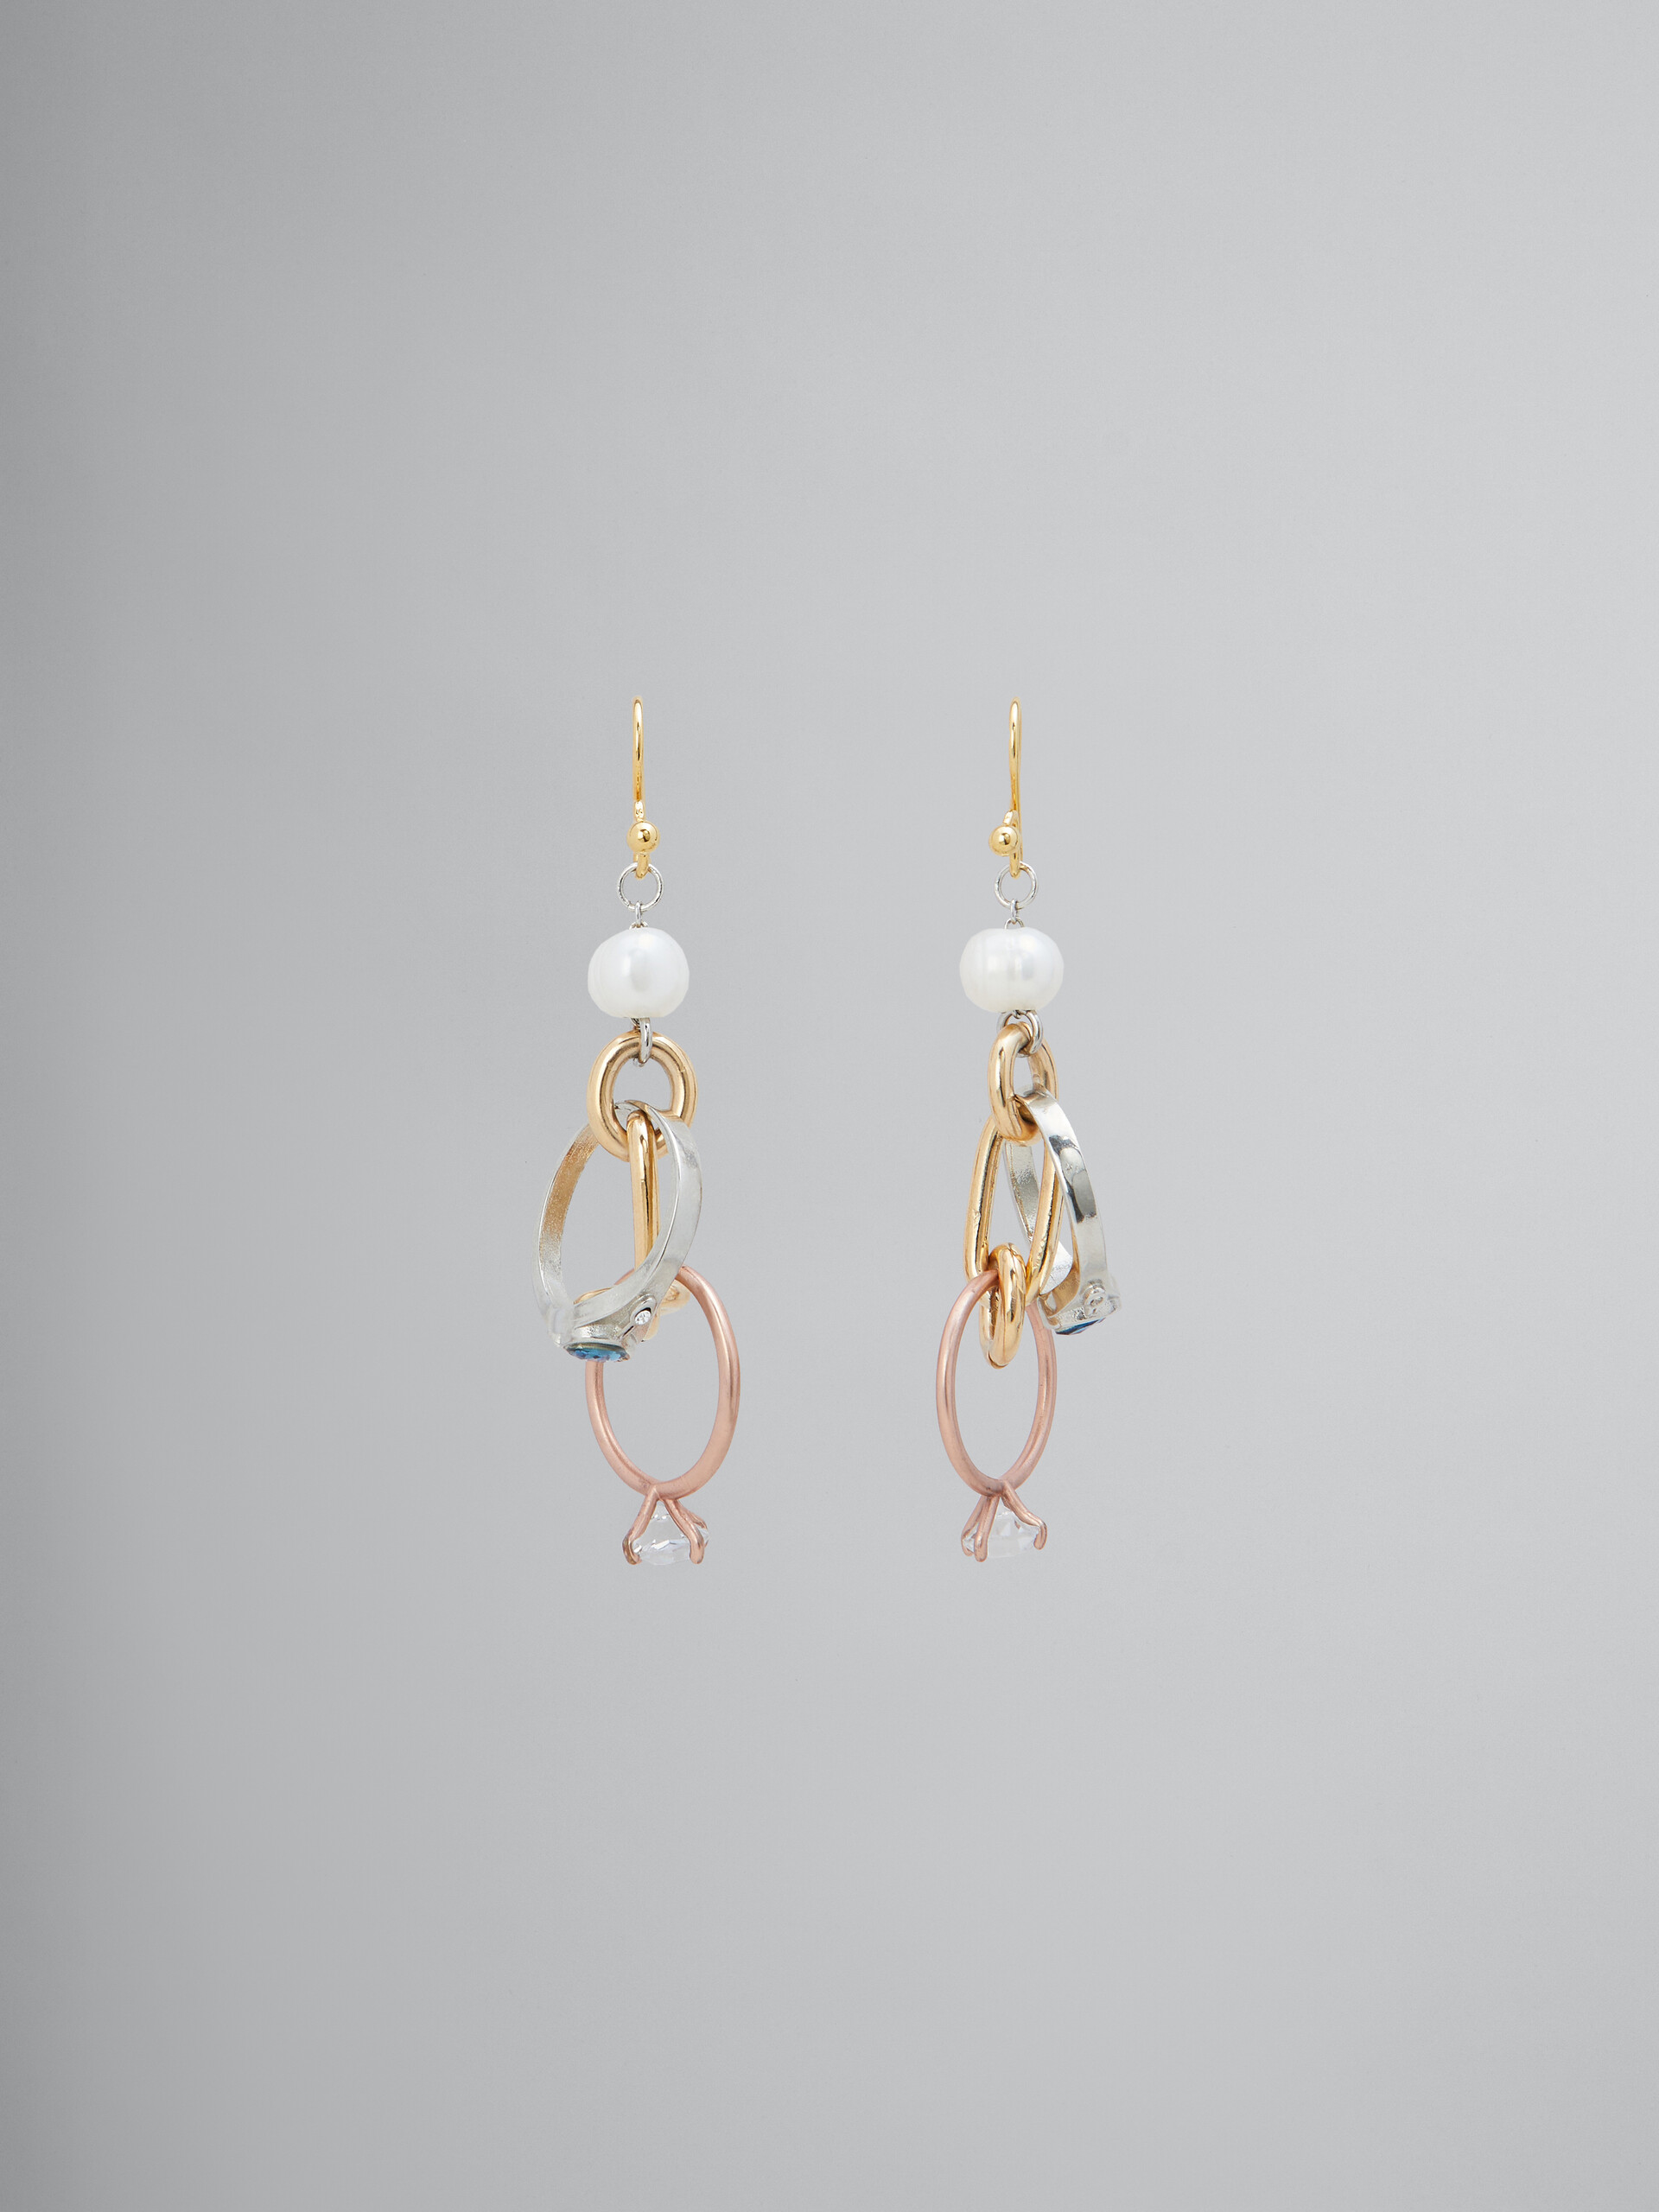 Drop earrings with chains and rings - Earrings - Image 1